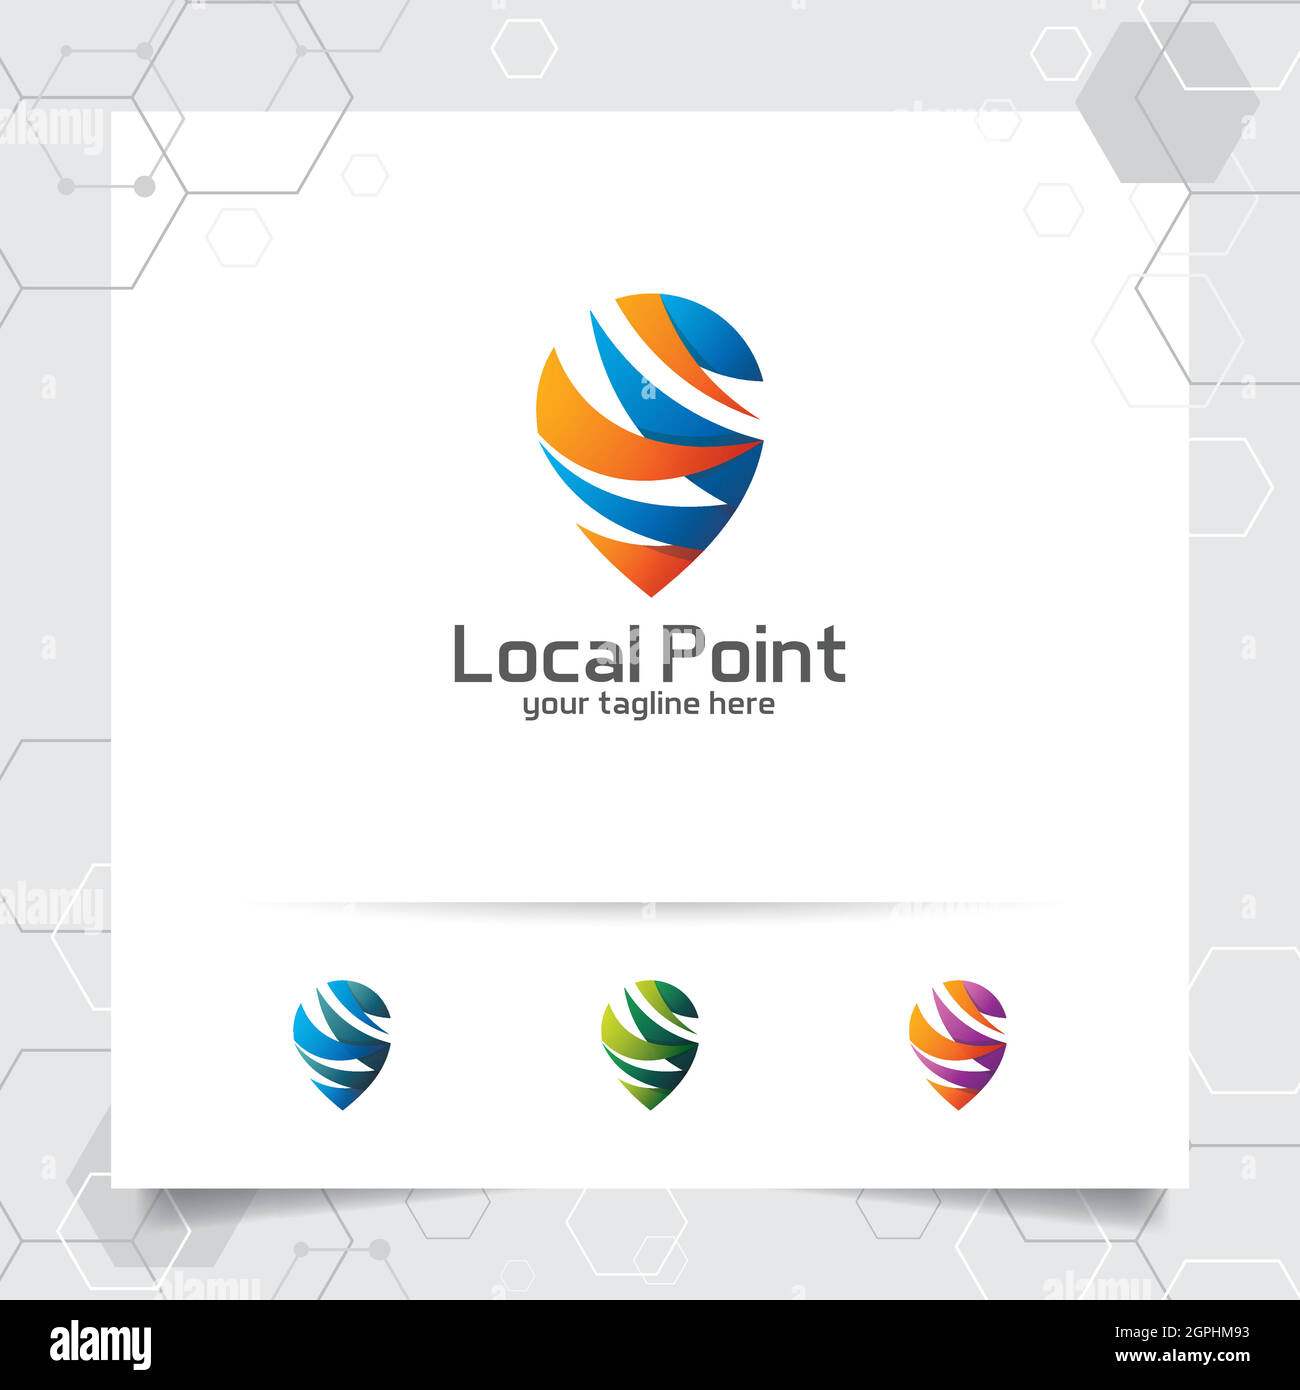 City locate logo vector with concept of abstract pin map locator symbol design for travel, local guide, gps, and tour. Stock Vector